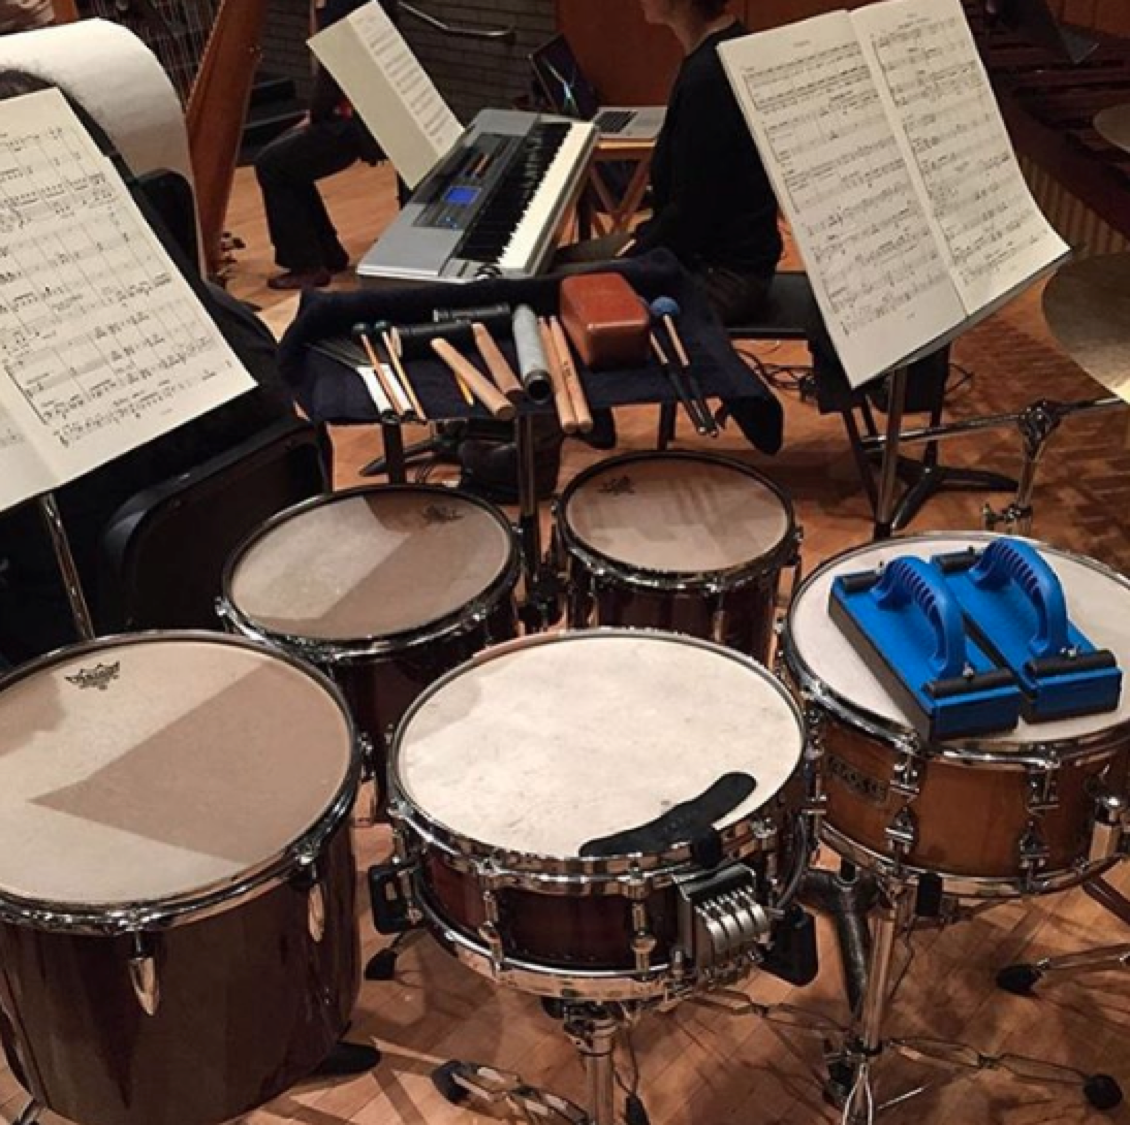 Just a peek into the life of a #UBCmusic student. Thanks to musician @gunnerwestjet for the photo!